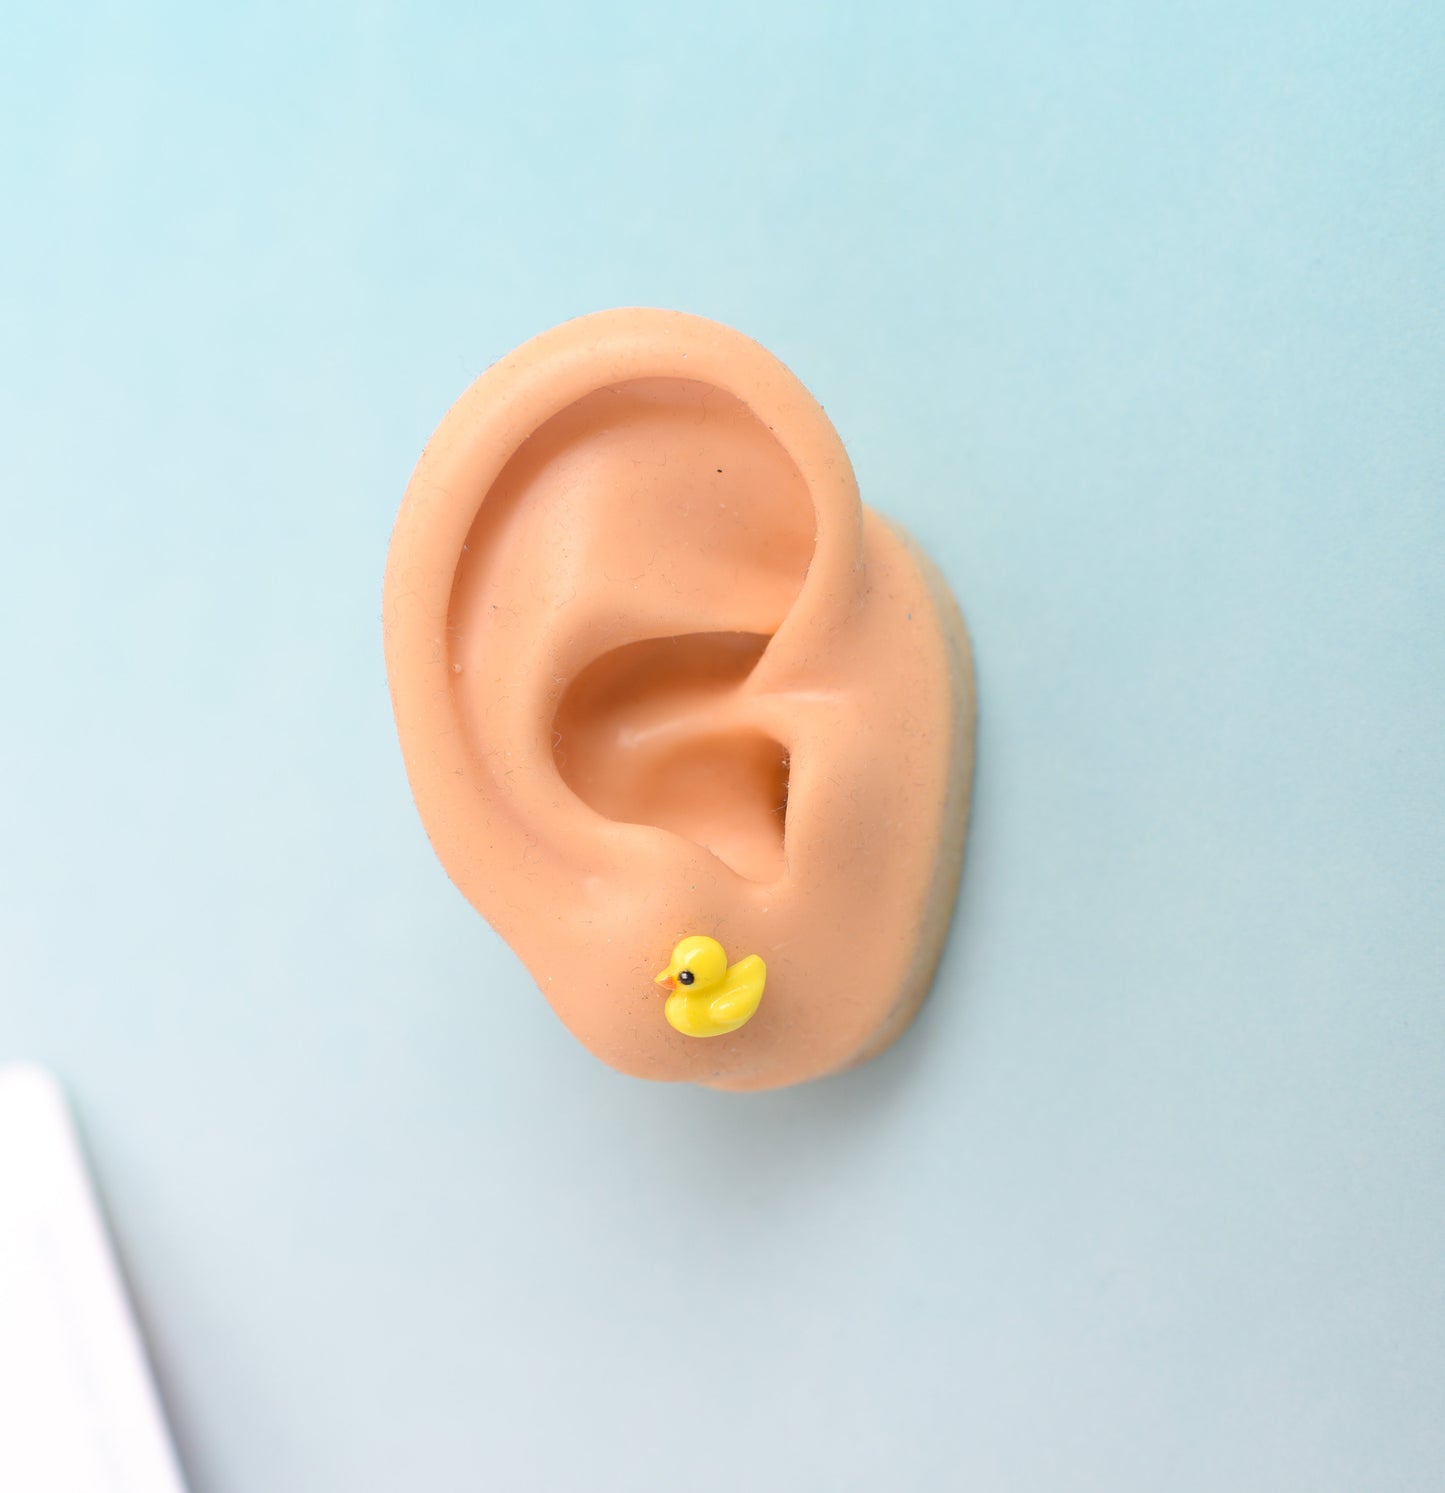 Tiny Rubber Ducky Earrings with Titanium Posts